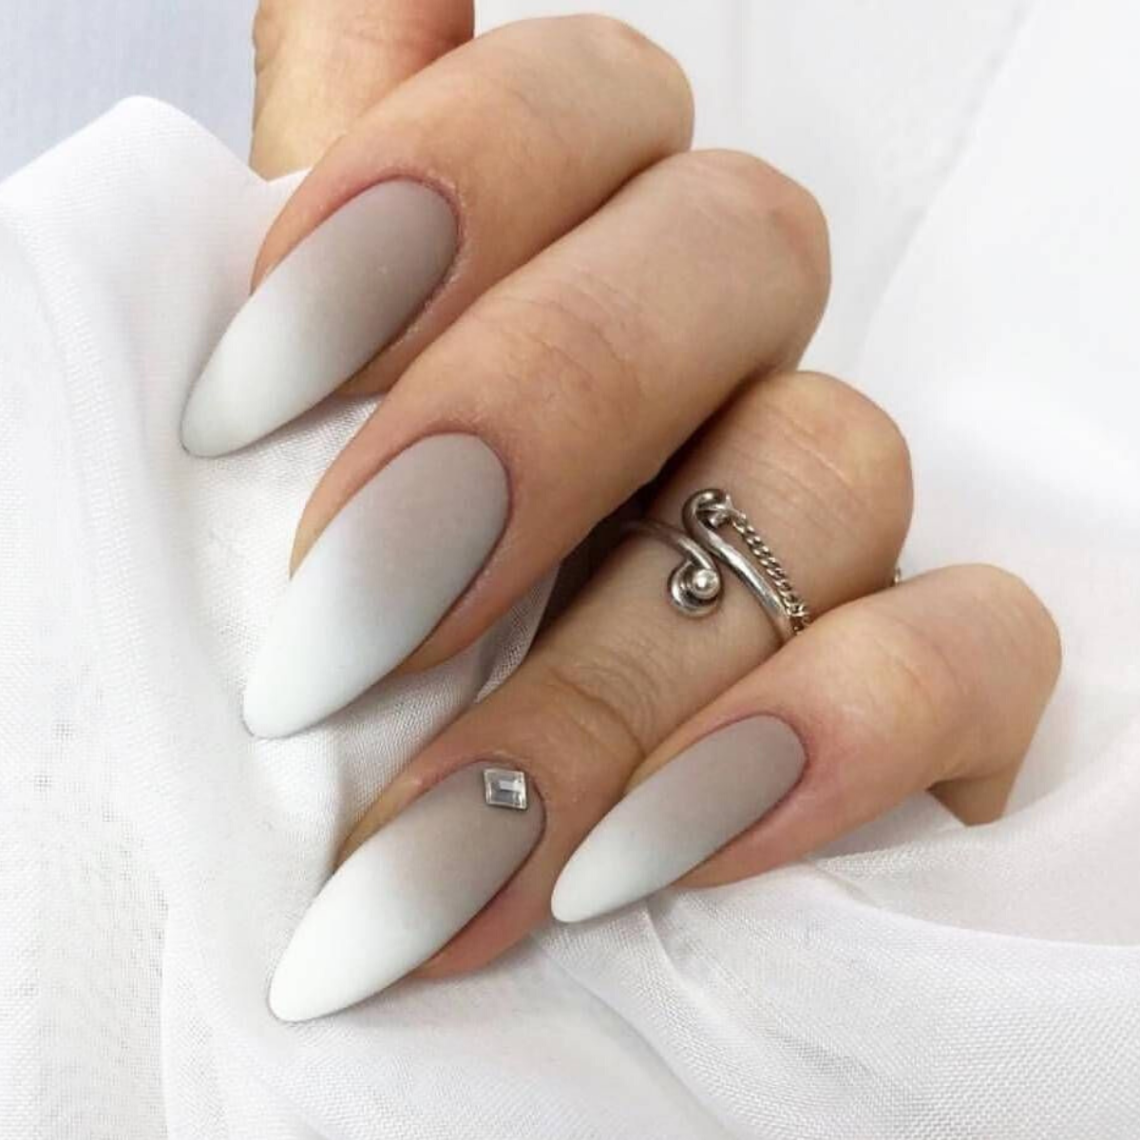 Get Inspired With Stunning White Nail Designs For A Chic And Timeless Look